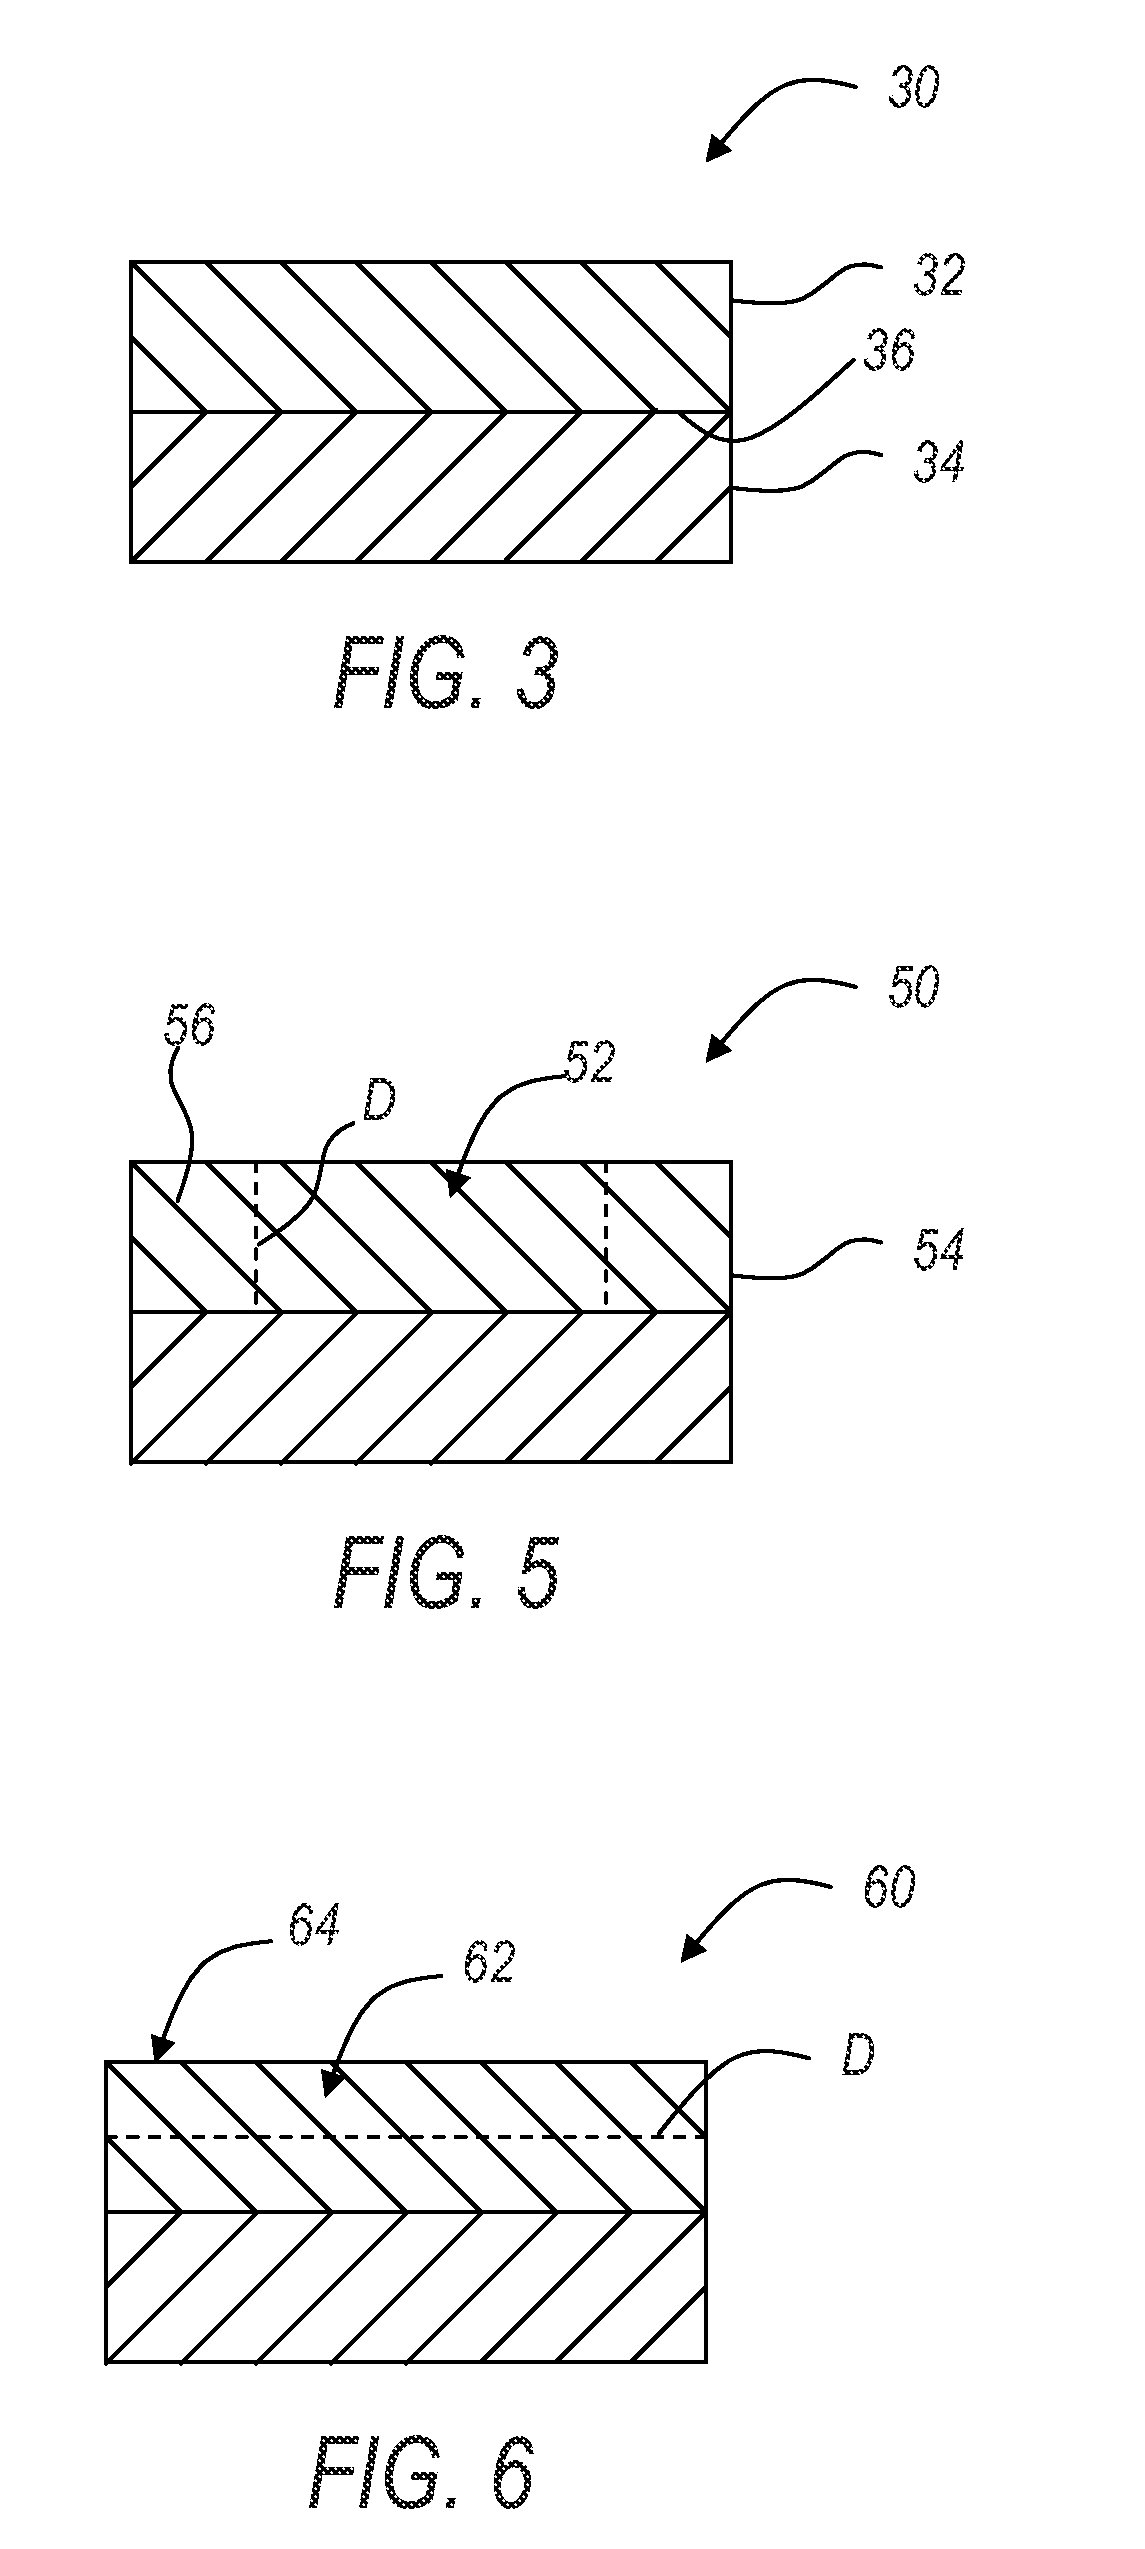 Nondestructive Device and Method for Evaluating Ultra-Hard Polycrystalline Constructions